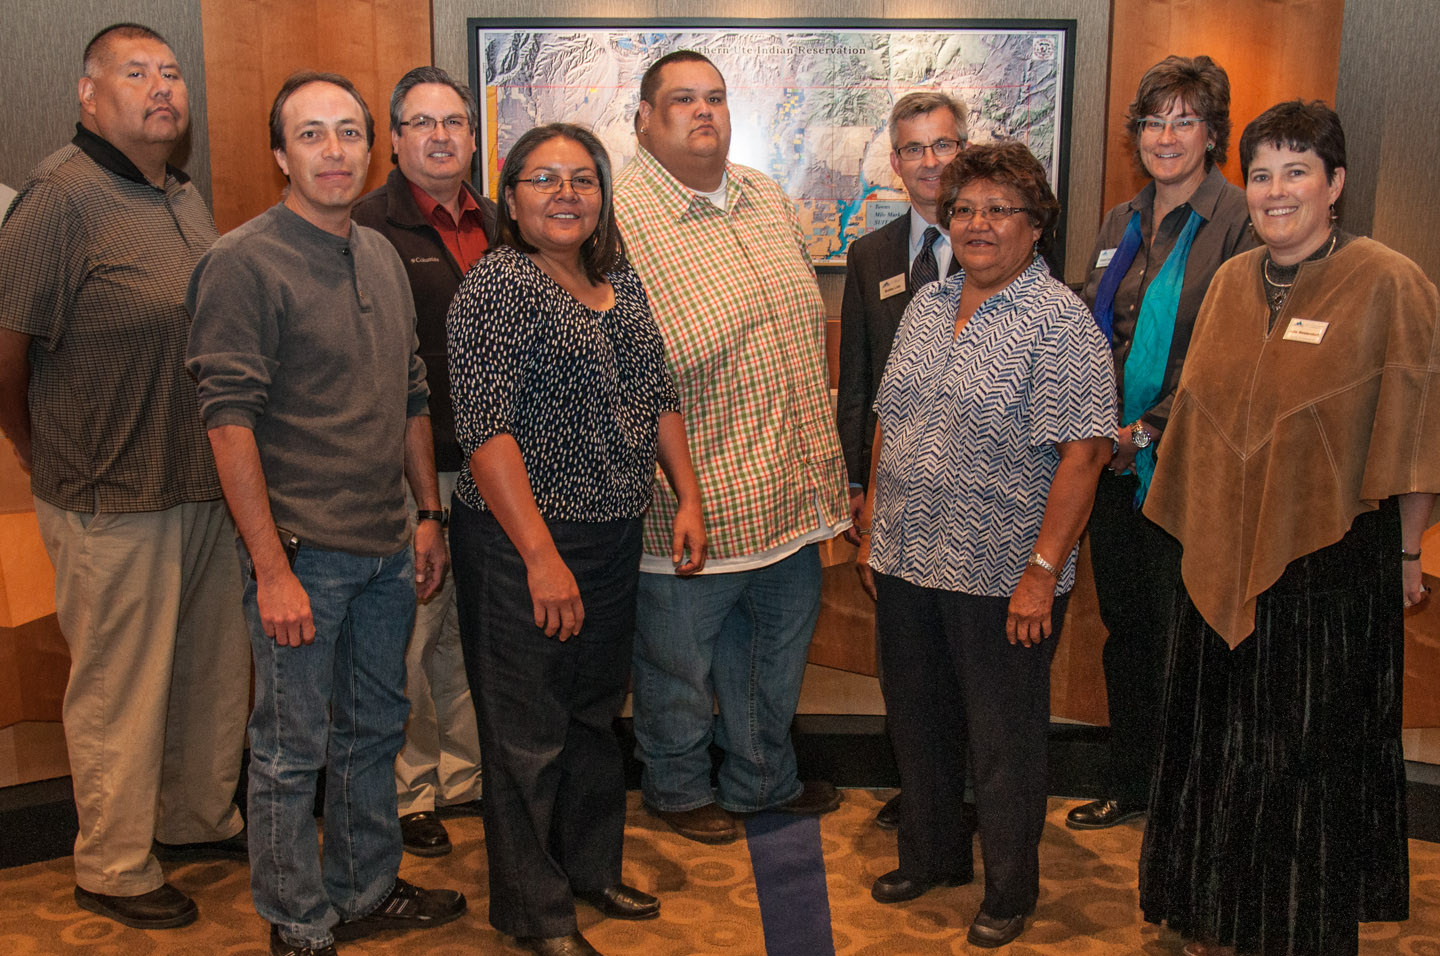 Members of the Southern Ute Indian Tribal Council and La Plata County Board of County Commissioners (left to right): Councilman Alex Cloud, Councilman Aaron V. Torres, Vice Chairman James M. Olguin, Council Lady Pathimi Goodtracks, Chairman Jimmy R. Newton Jr., Commissioner Bobby Lieb Jr., Council Lady Ramona Y. Eagle, Commissioner Gwen Lachelt and Commissioner Julie Westendorff.